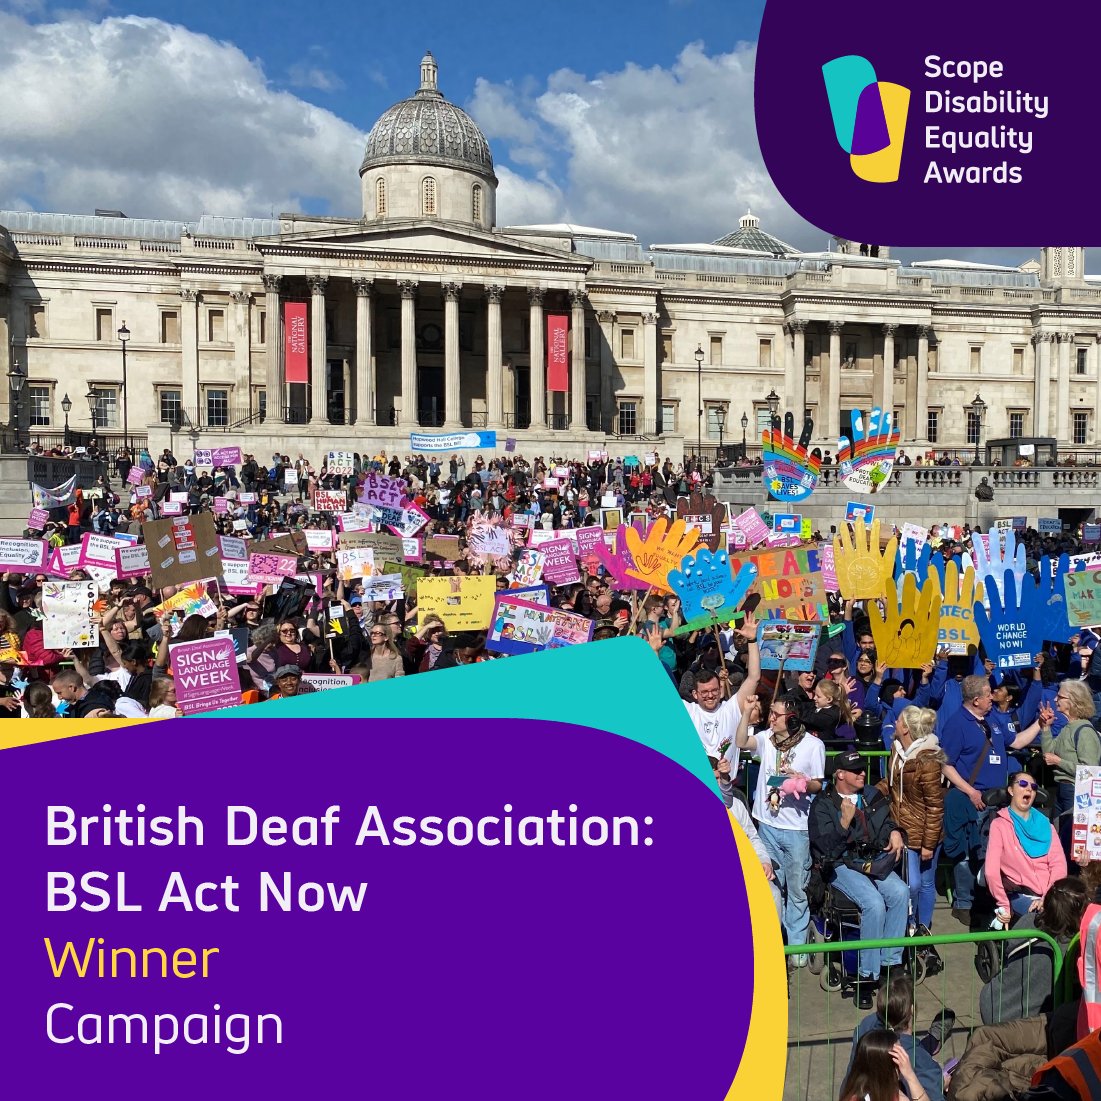 🏆 The winner of our Campaign award is the British Deaf Association, for their BSL Act Now campaign. British Sign Language (BSL) is now recognised in law in England, Scotland, and Wales. @BDA_Deaf’s campaign influenced this milestone. A truly well-deserved win!